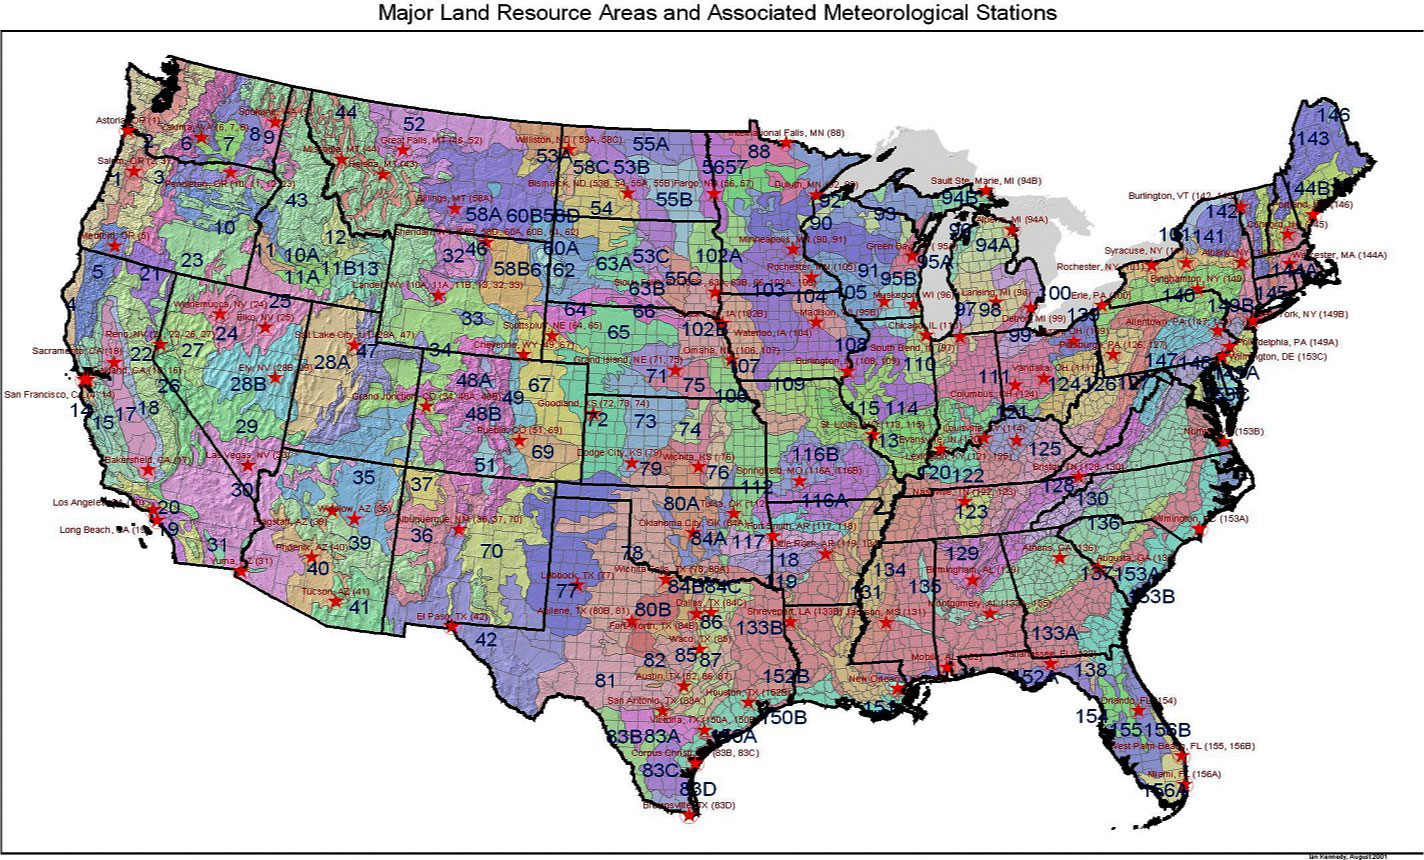 Full-size U.S. map indicating major land resources areas and associated meteorological stations